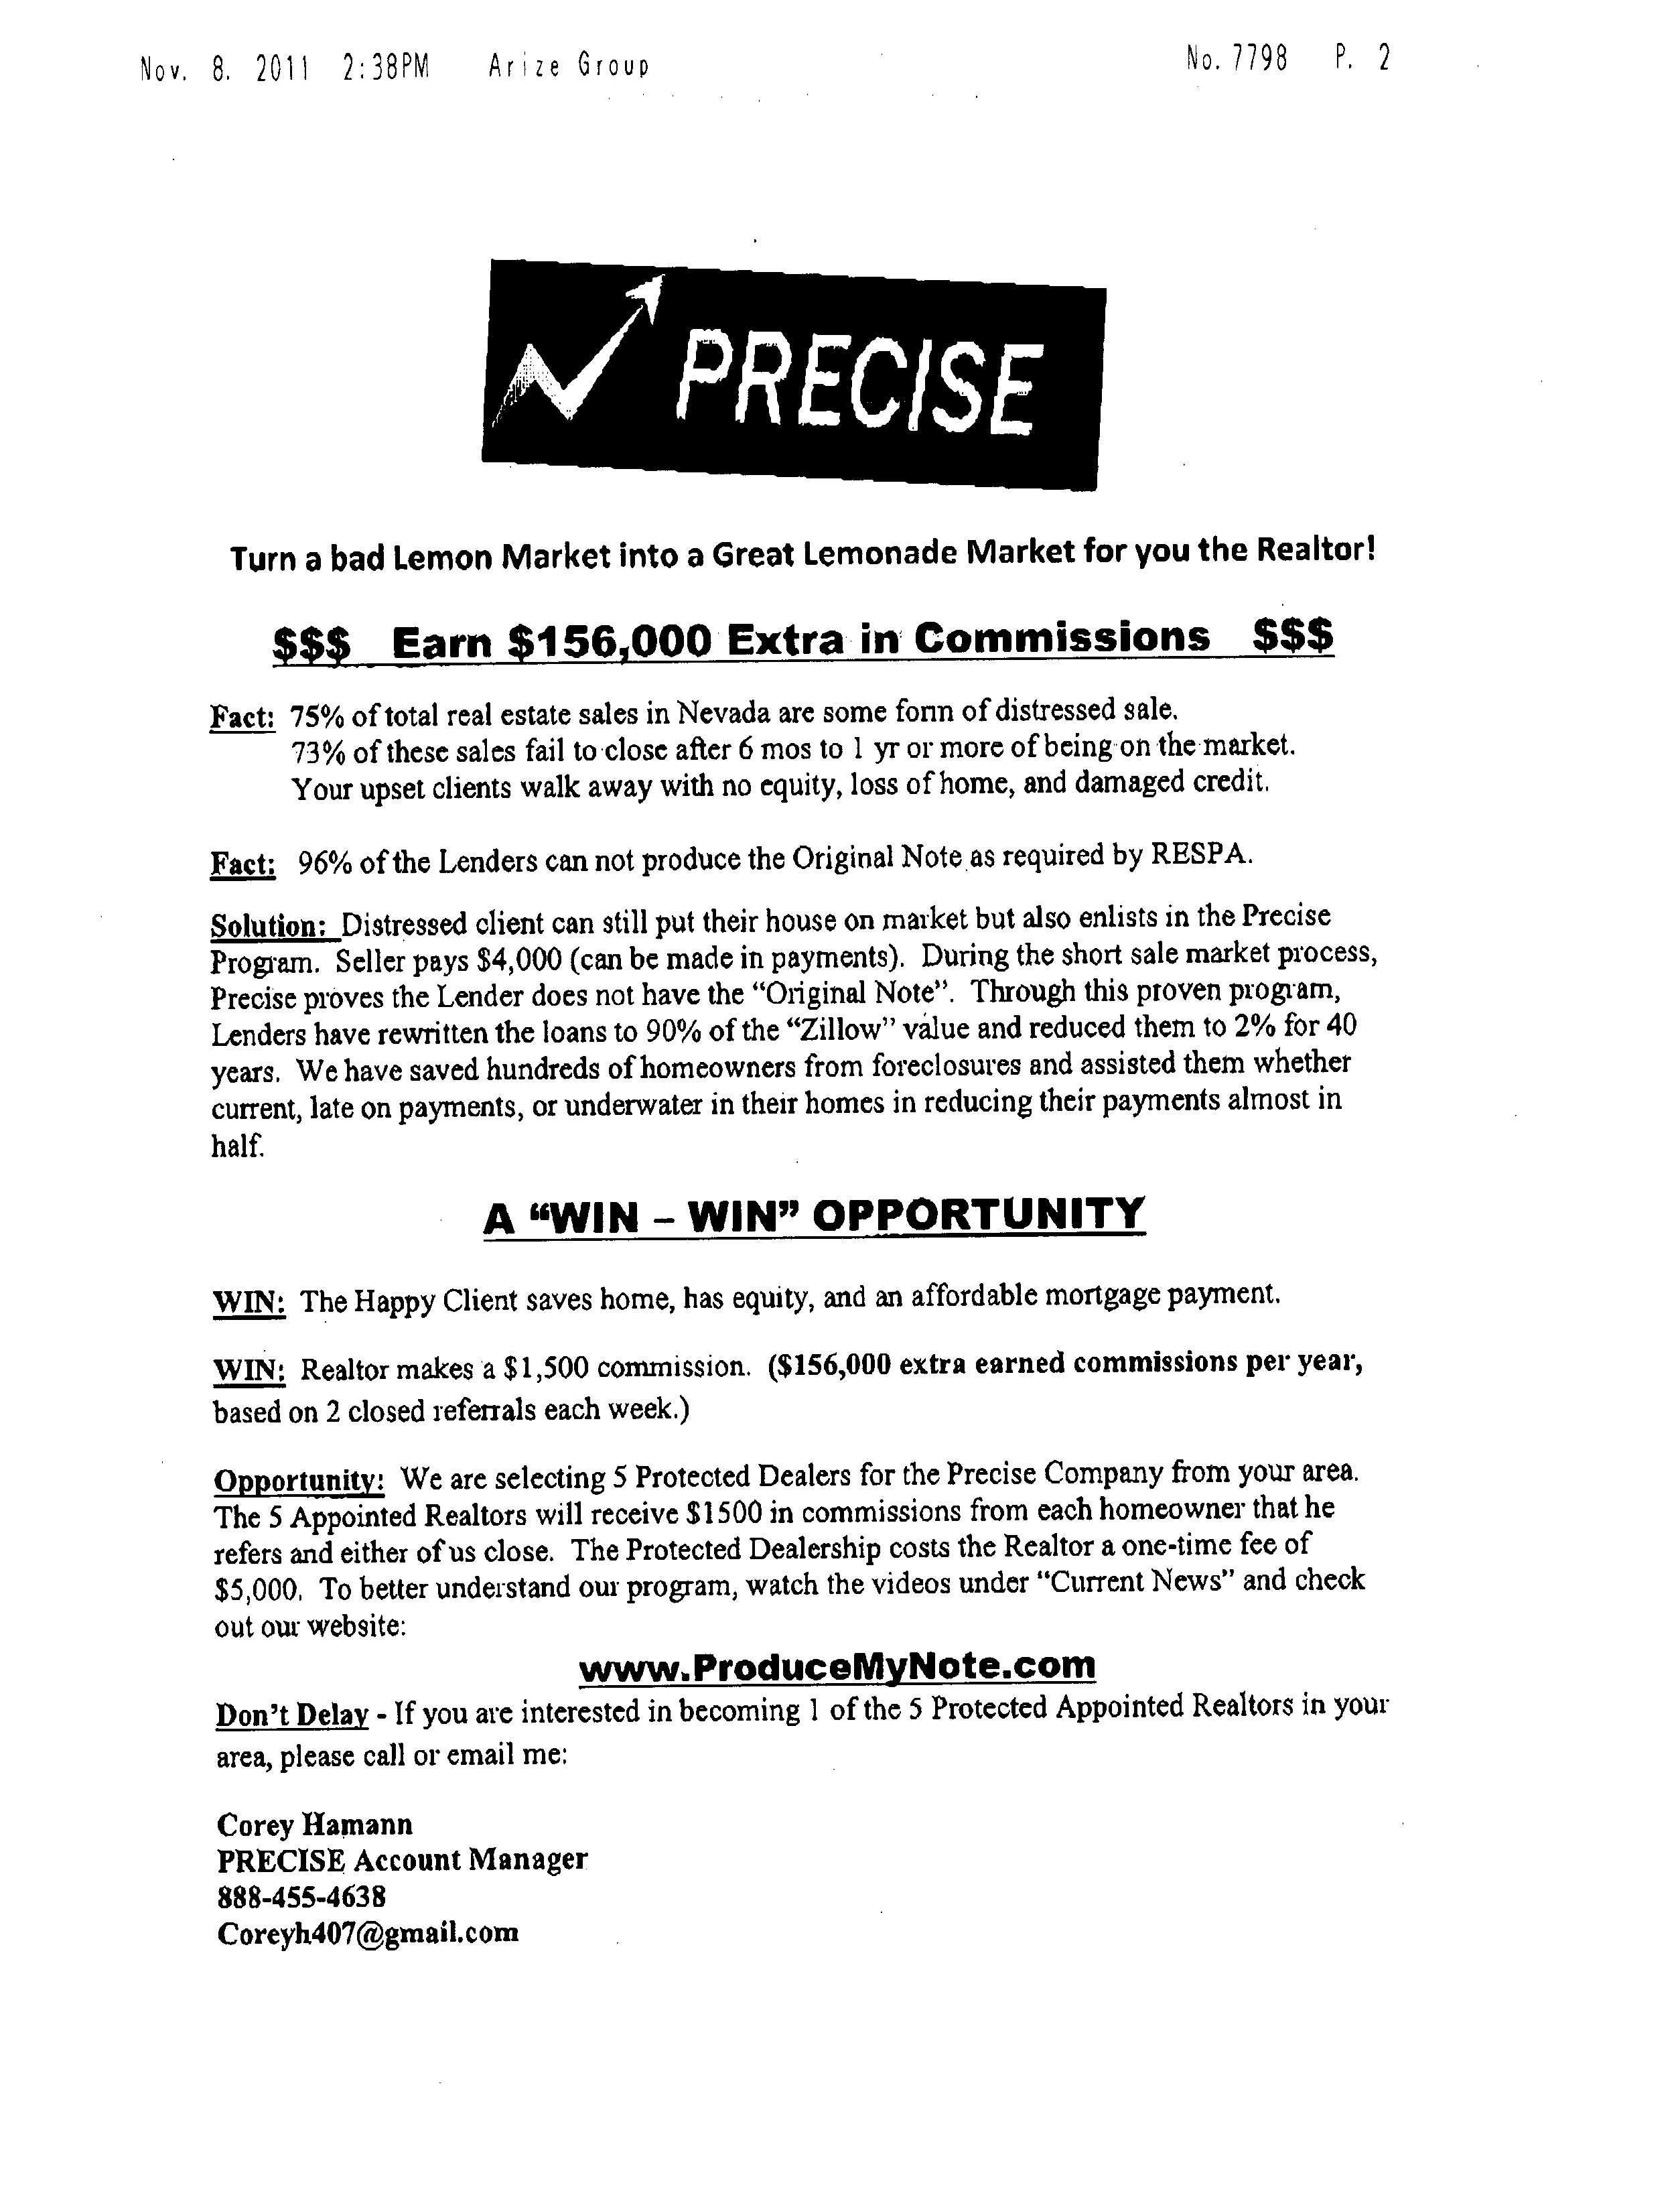 Their promotional fax to real estate agents